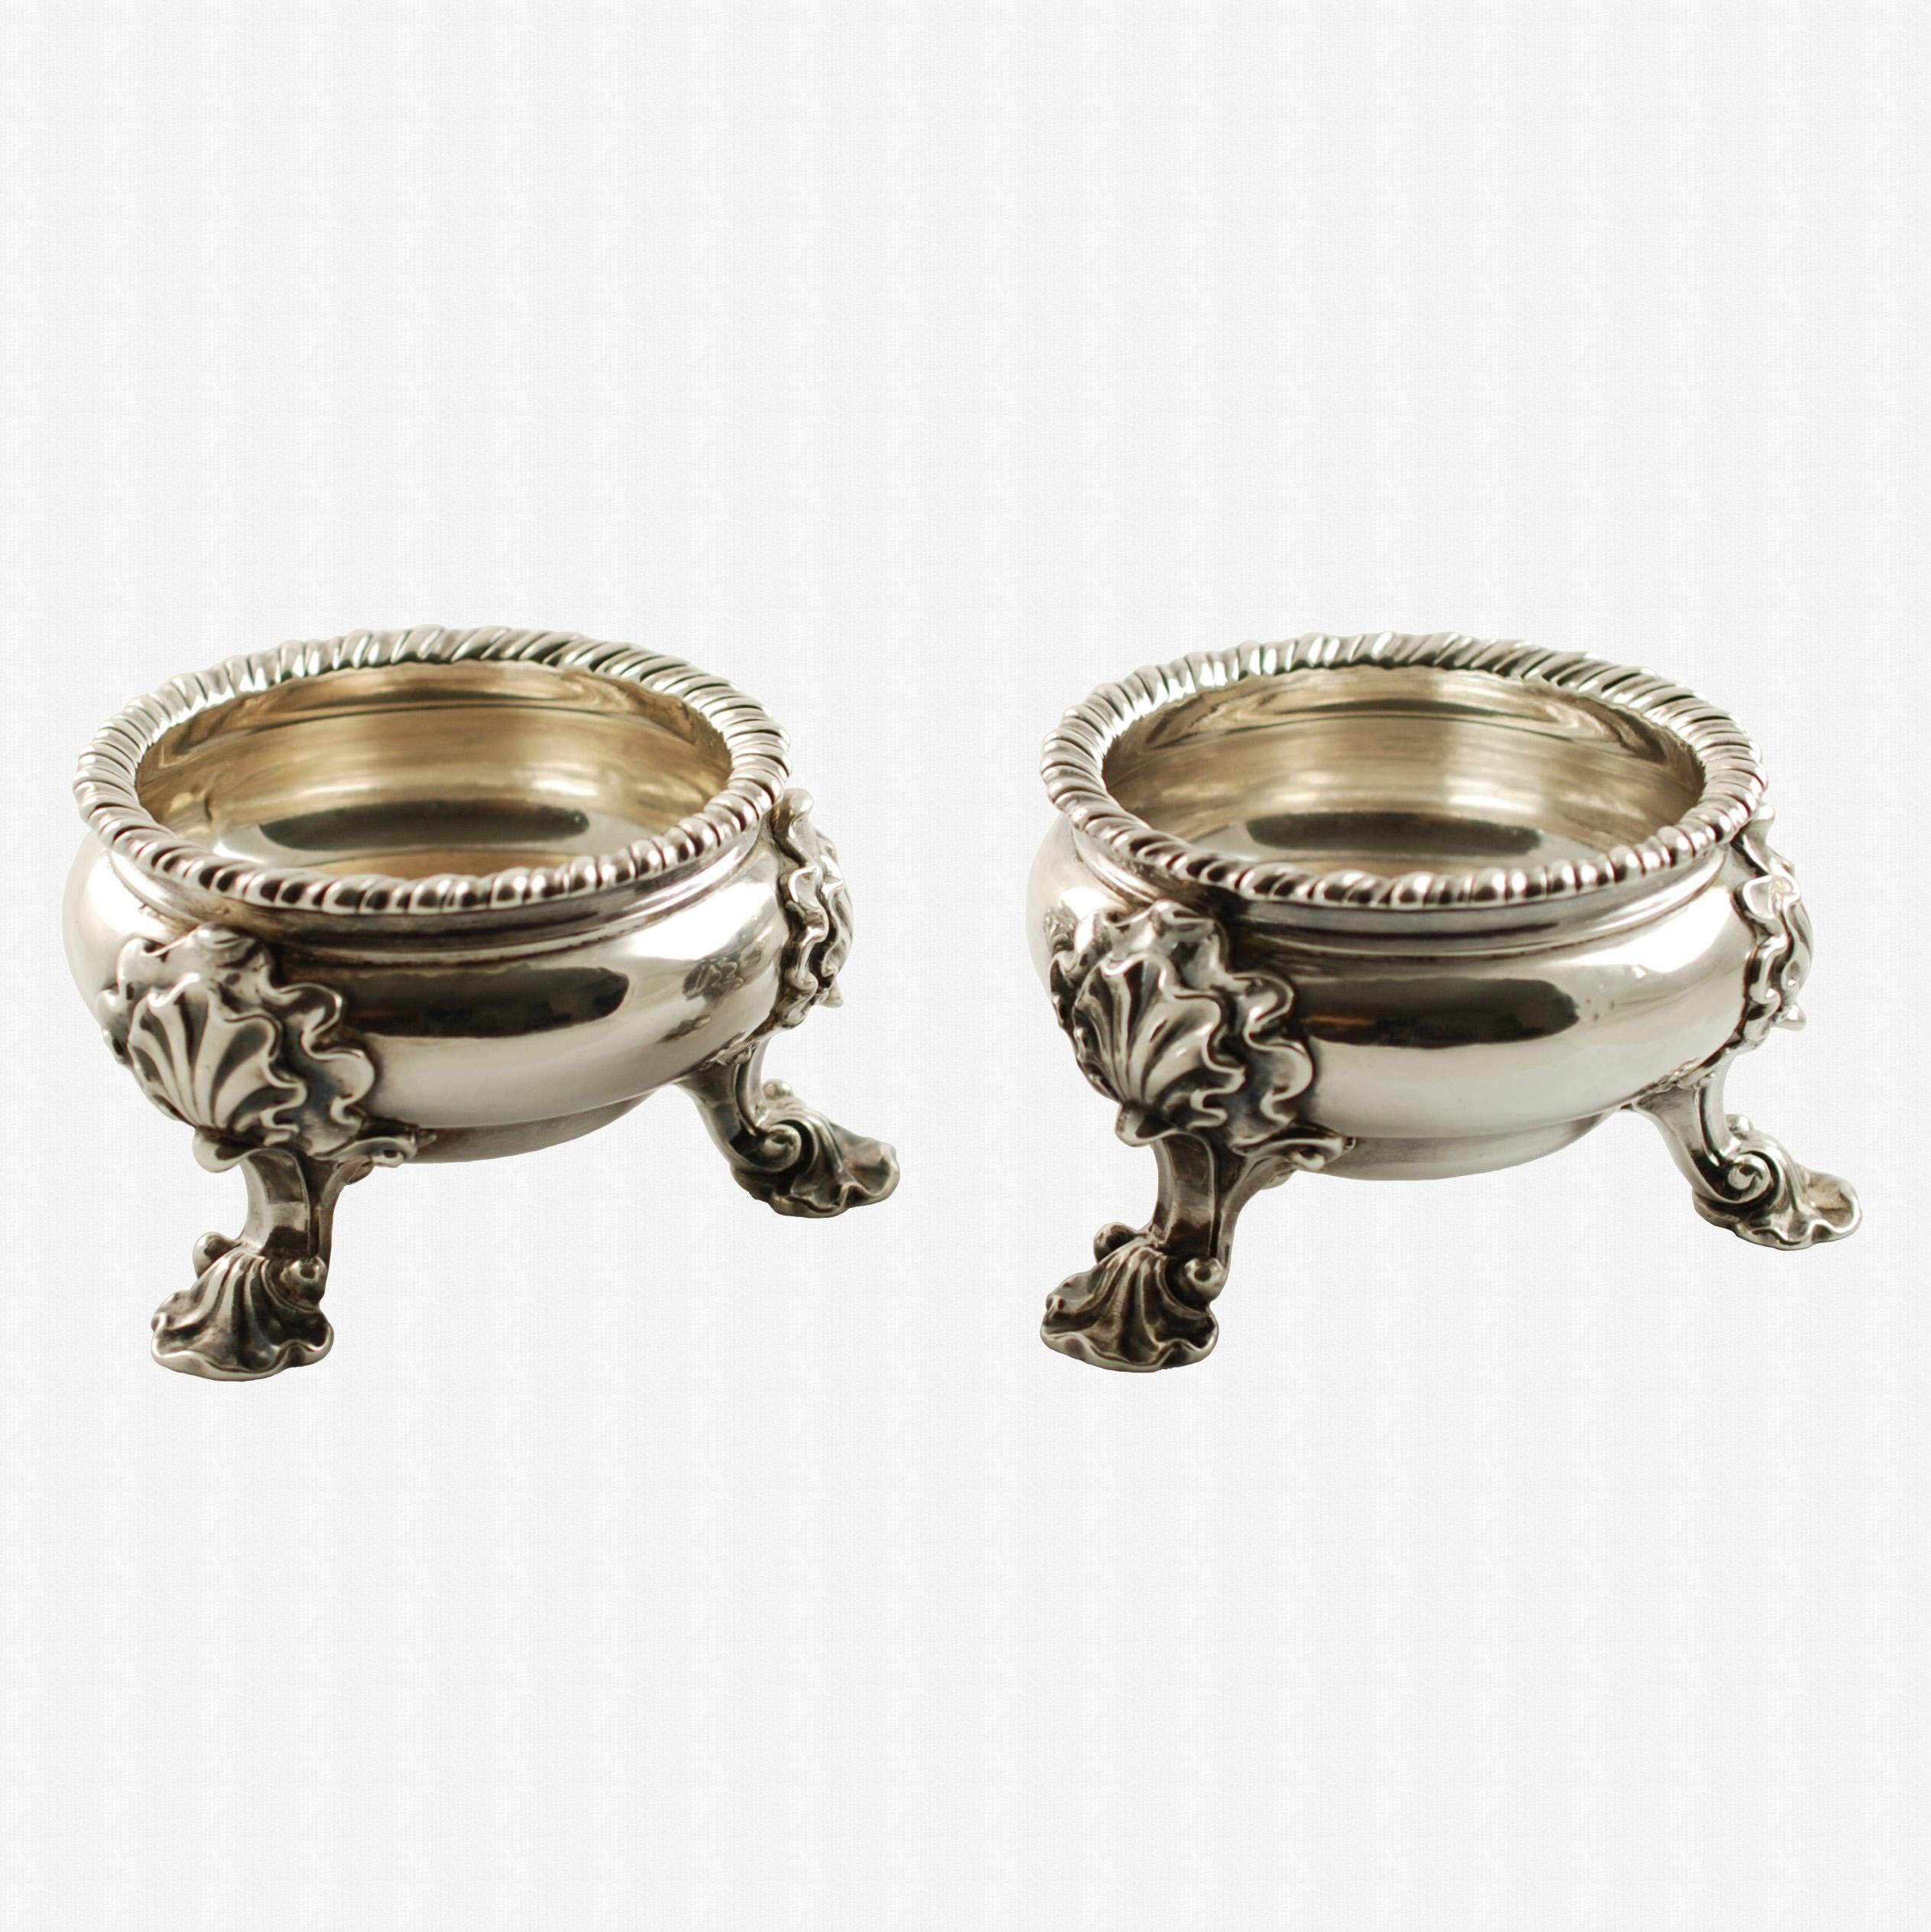 English Antique Pair of Lewis Pantin George II Sterling Silver Footed Master Salts